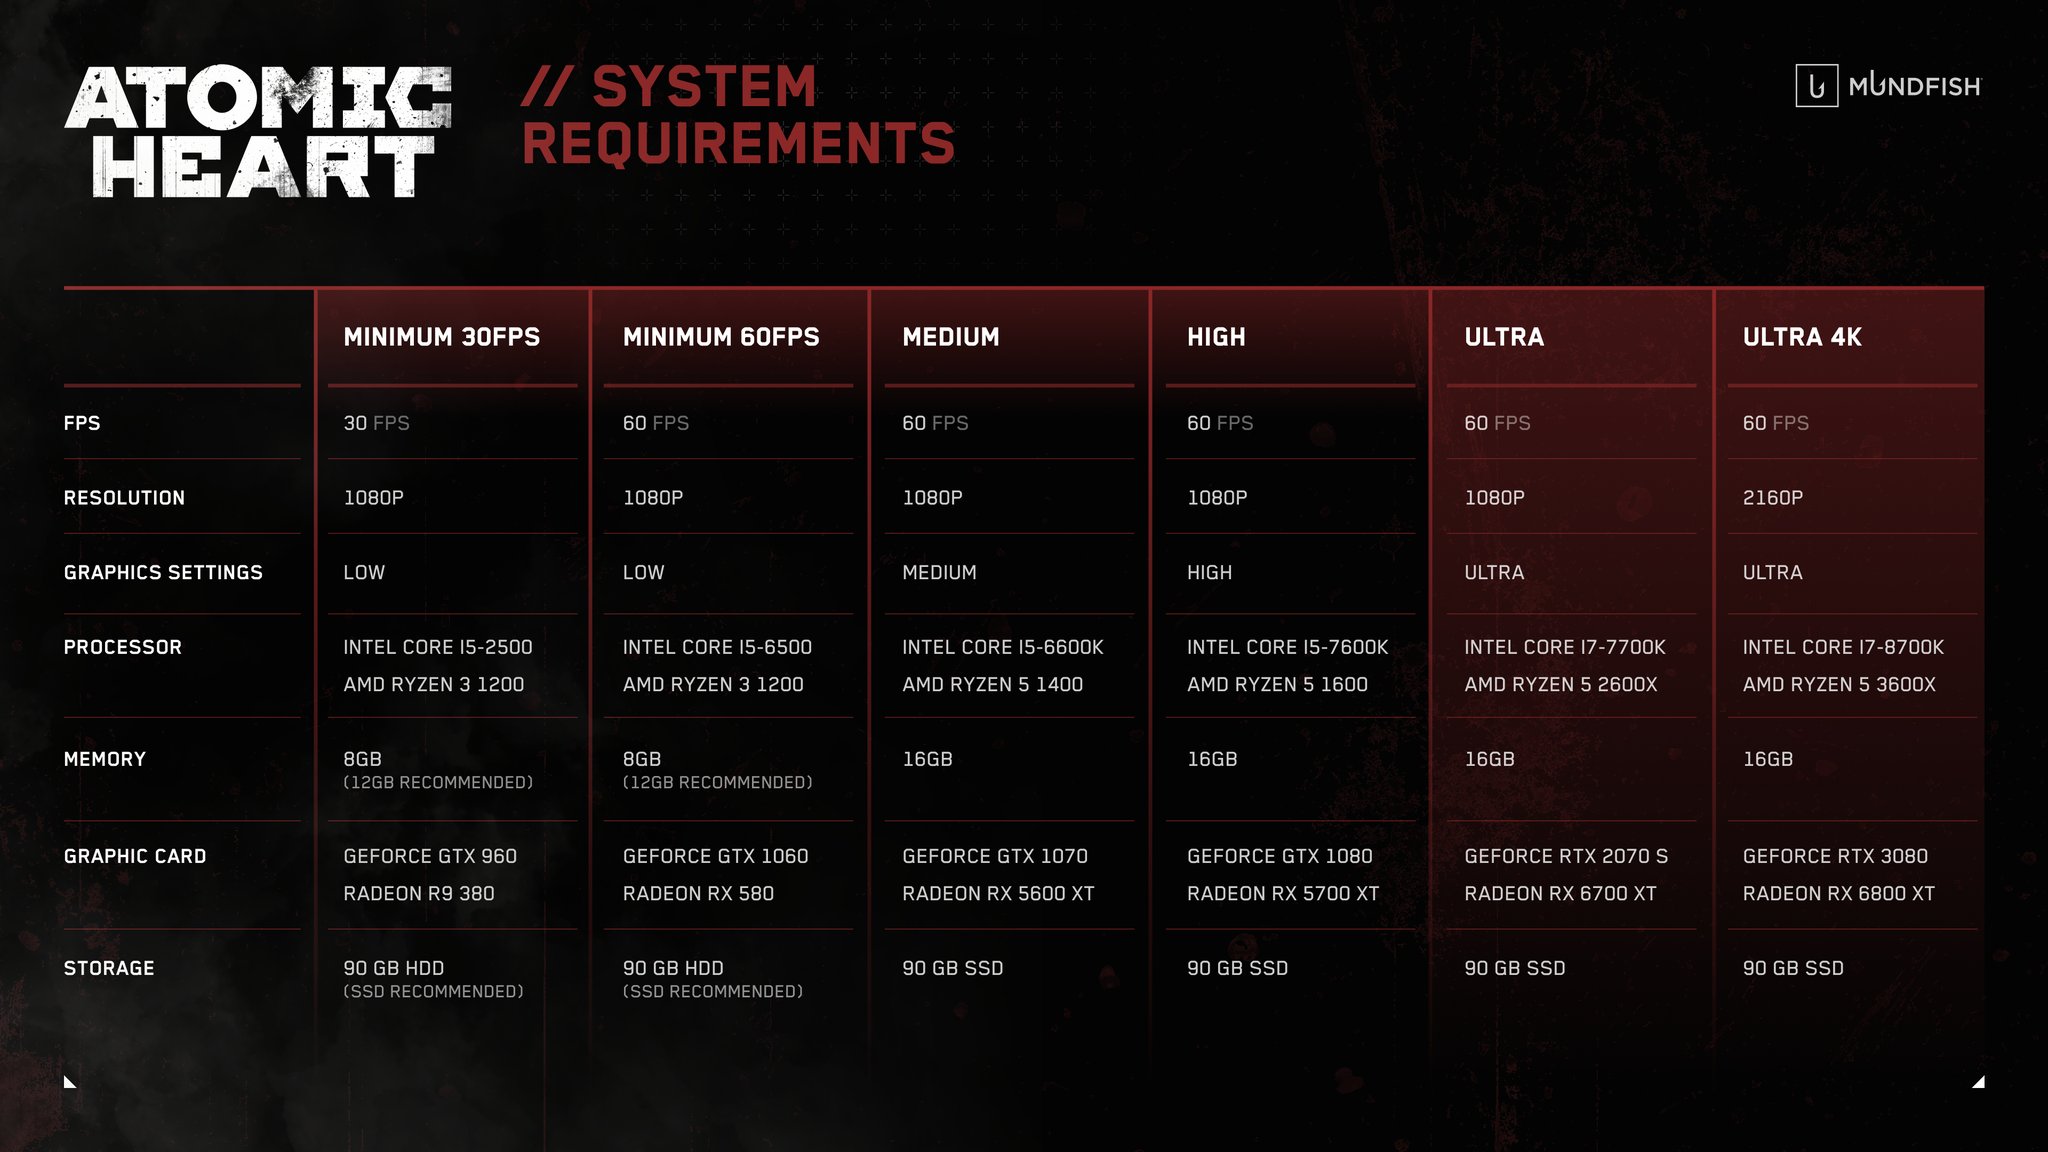 Atomic Heart system requirements